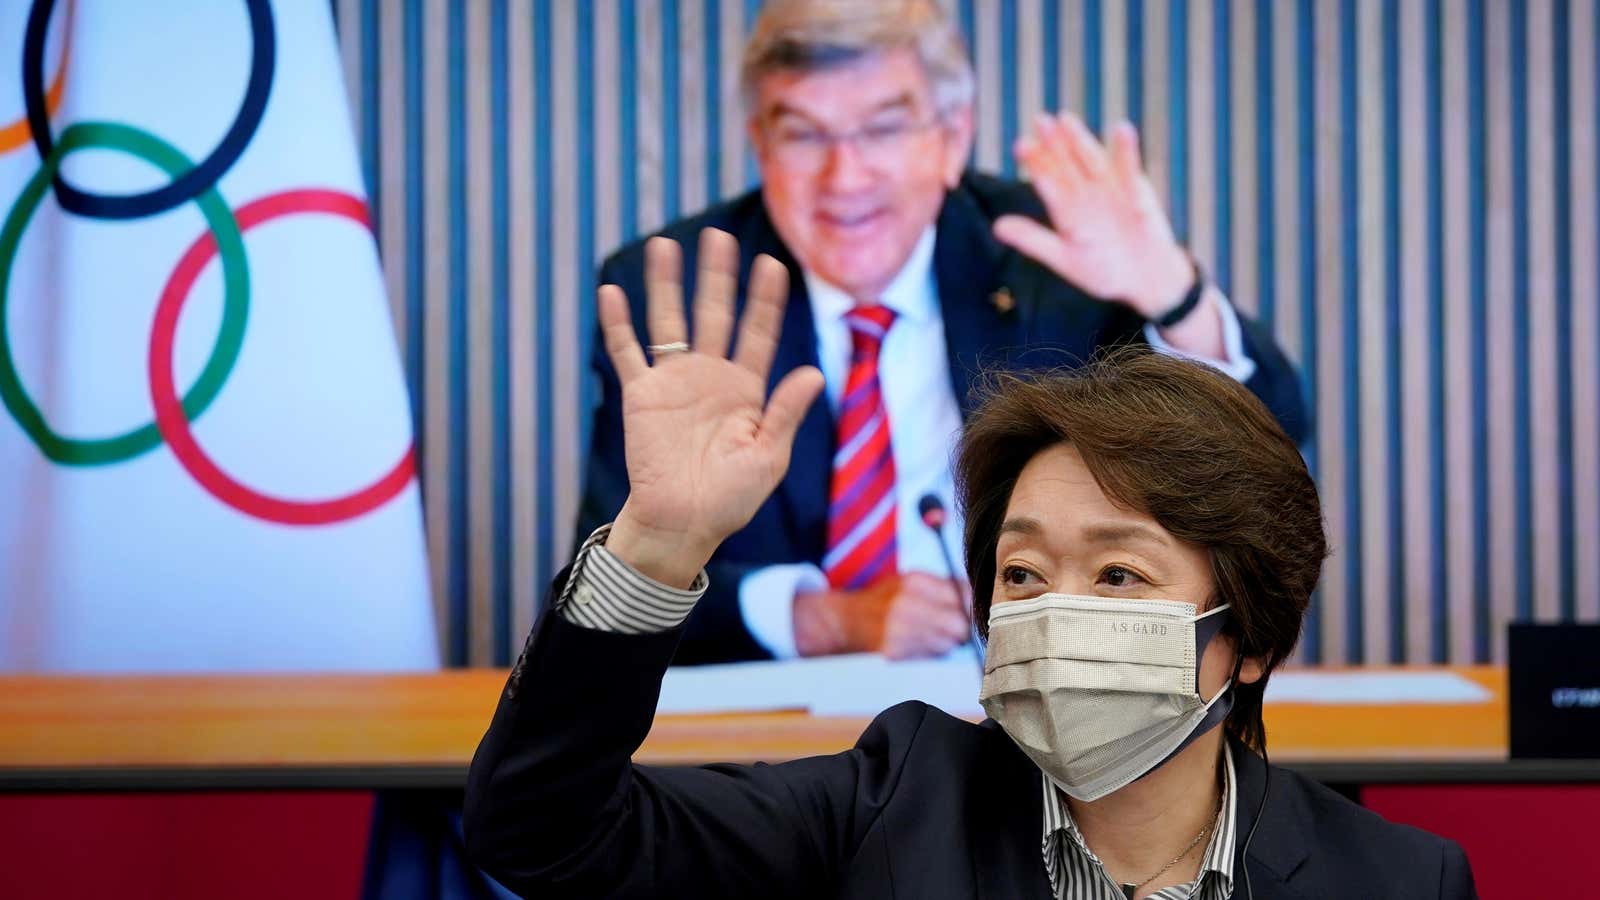 International Olympic Committee (IOC) president Thomas Bach (on a screen) and Tokyo 2020 Organizing Committee president Seiko Hashimoto wave to each other at the startâ€¦